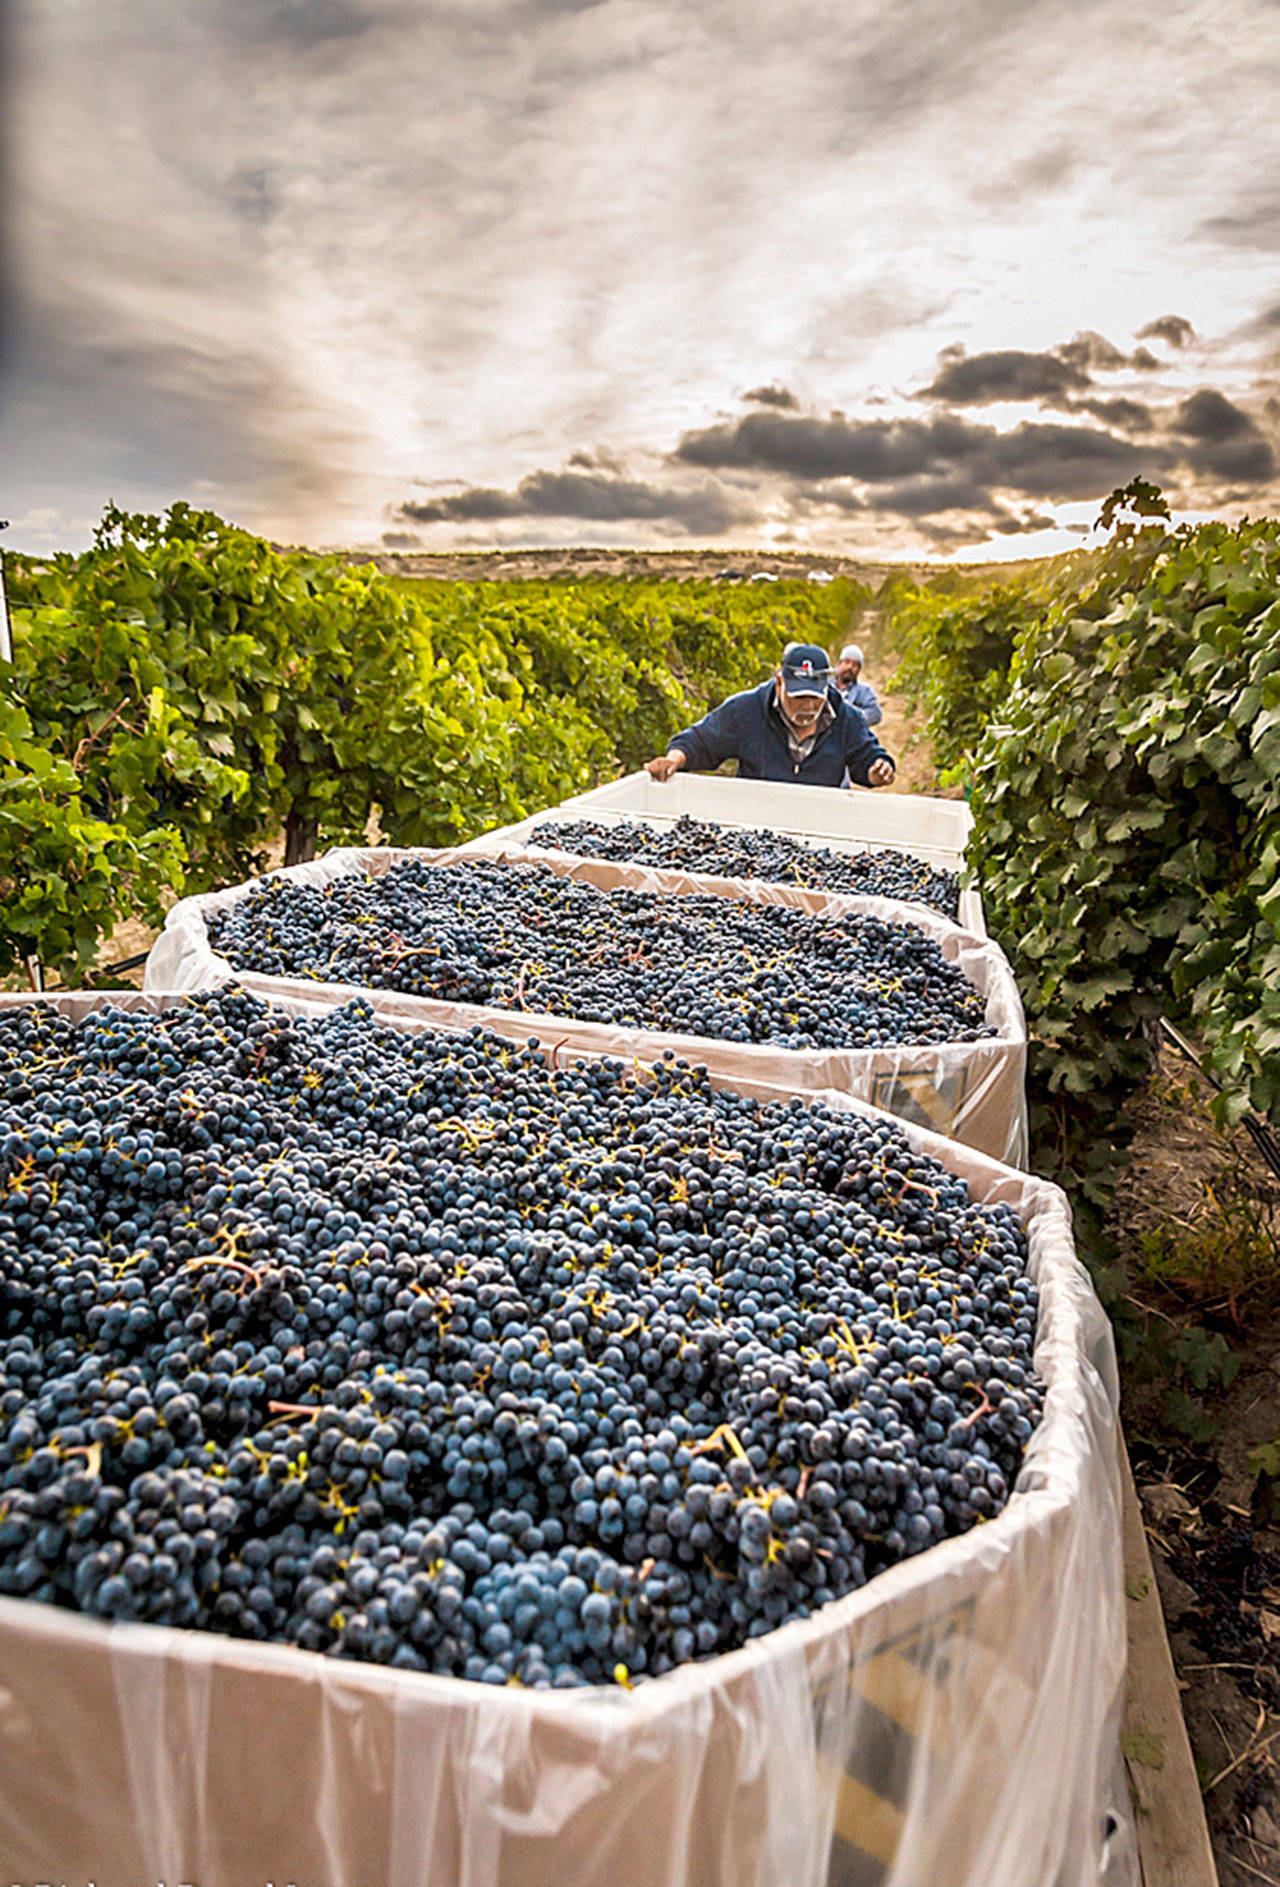 Bins of cabernet sauvignon now signal the largest harvest of grapes in the Washington state wine industry. (Richard Duval Images)